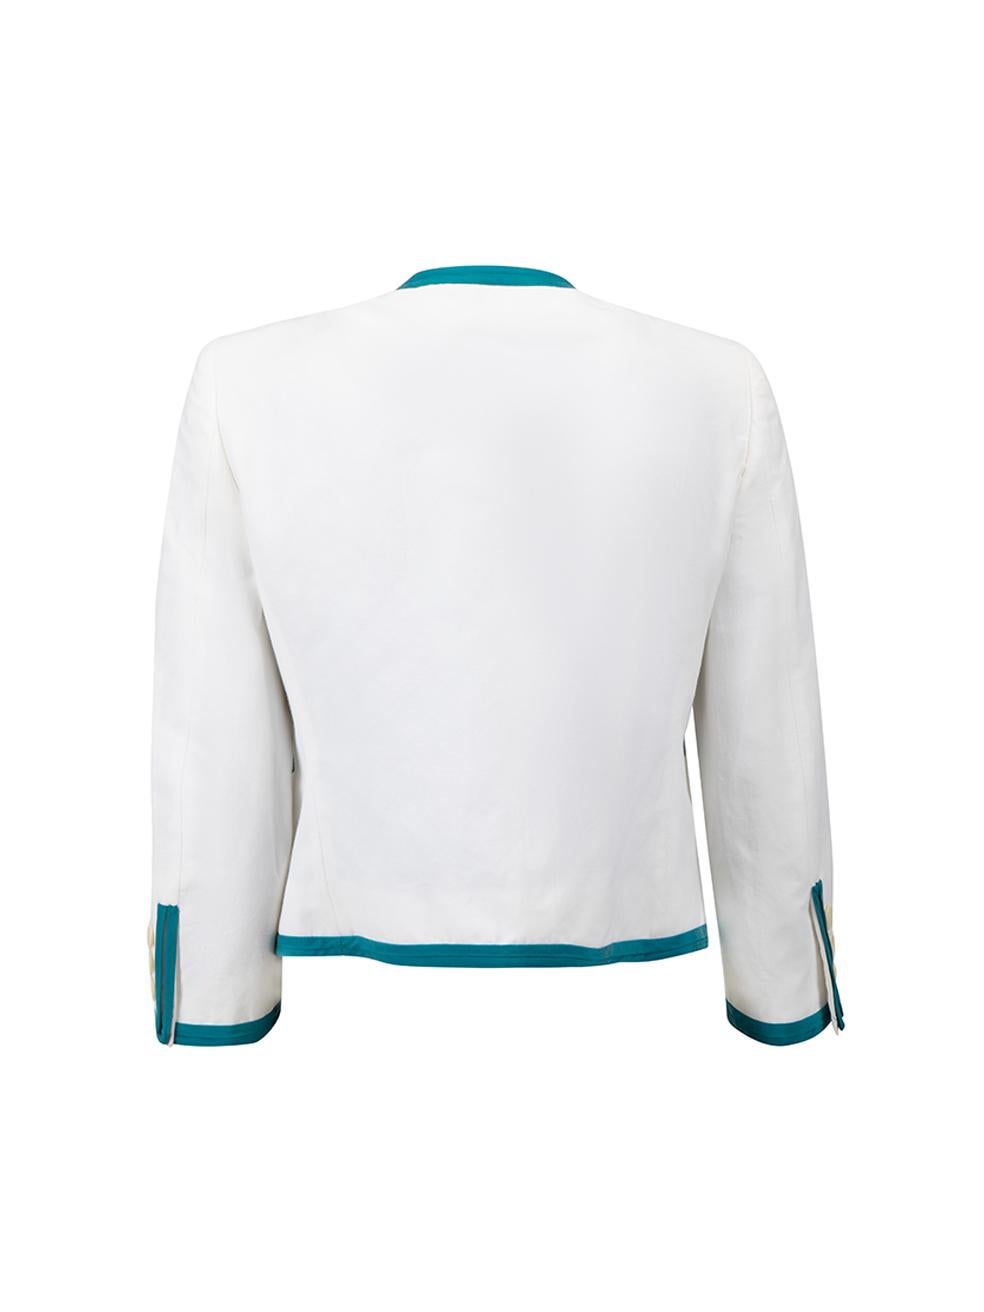 Moschino White Collarless Beaded Cropped Jacket Size S In Good Condition For Sale In London, GB